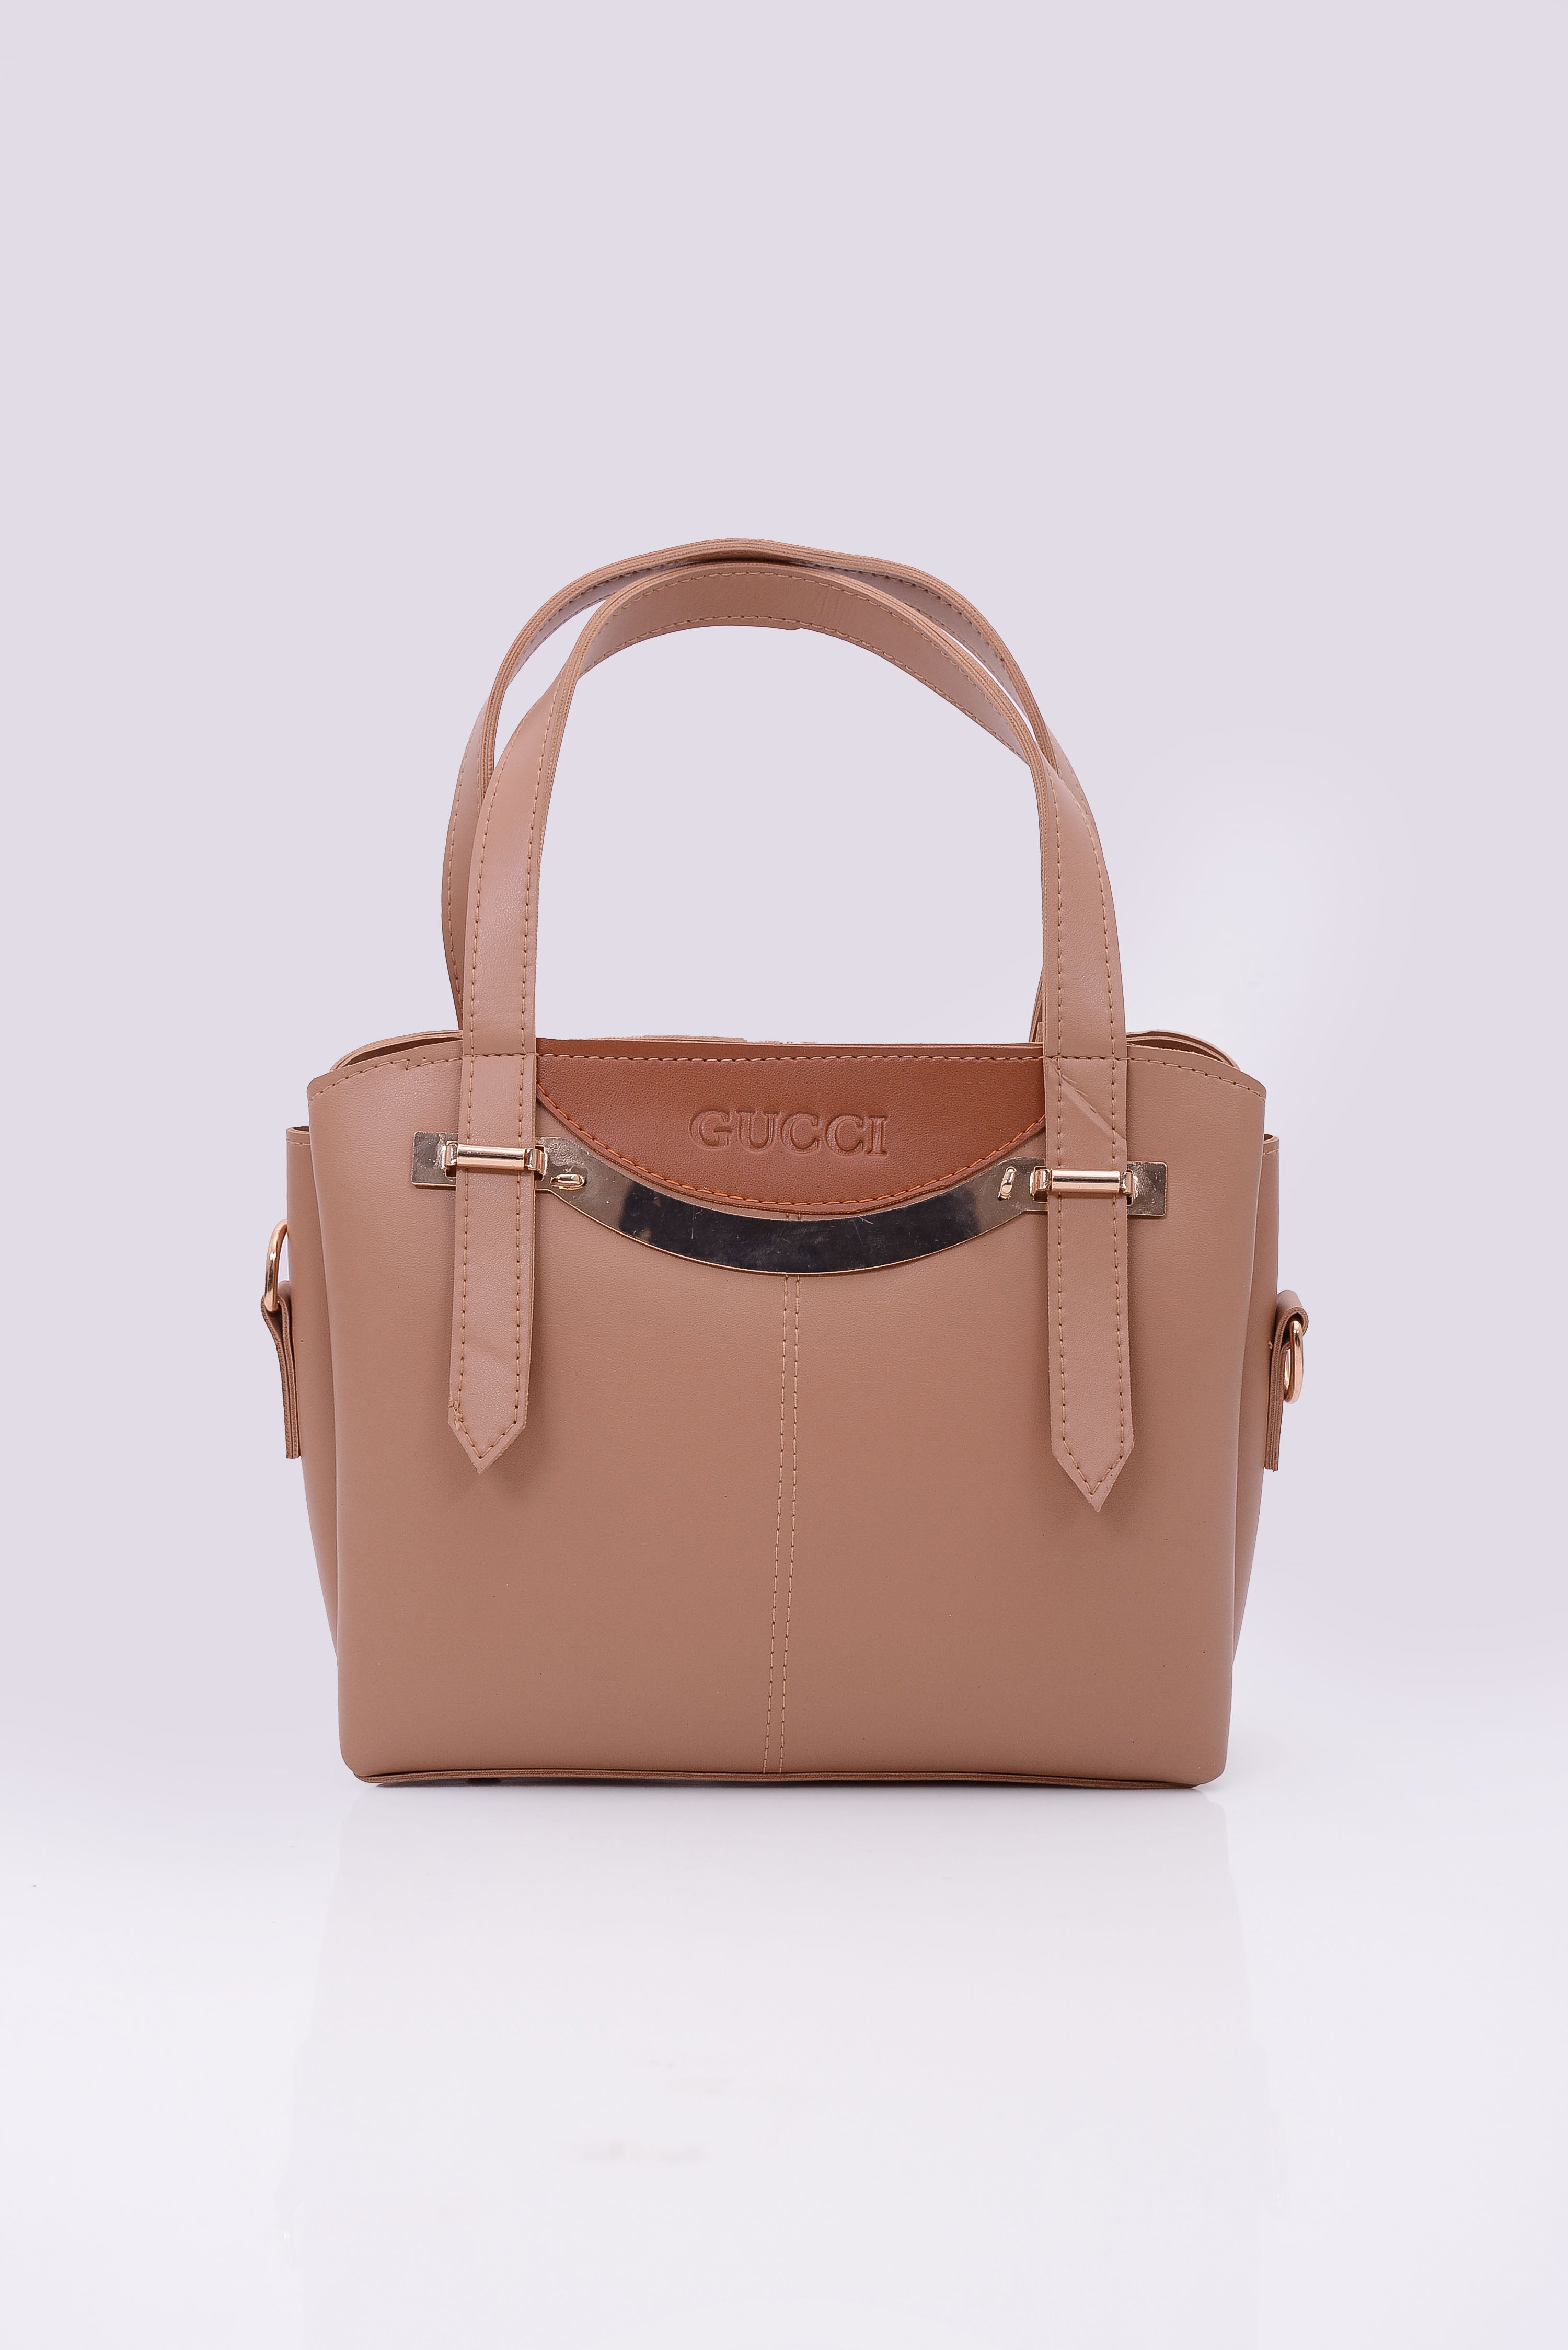 Hand Bags for Women |Ladies Purse Y10-31